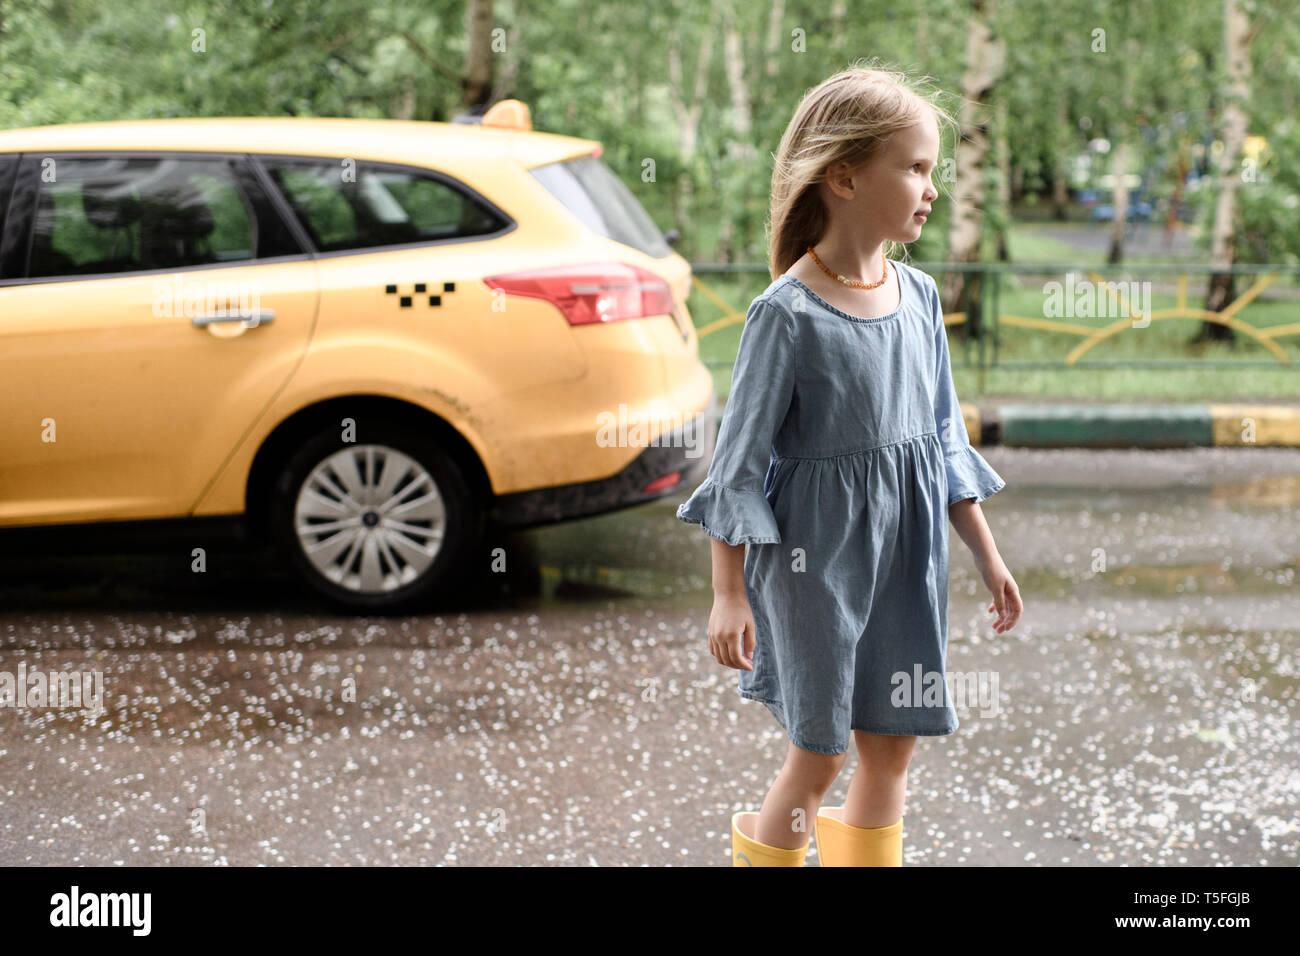 Girl wearing blue dress and vrossing road, yellow car in the background Stock Photo